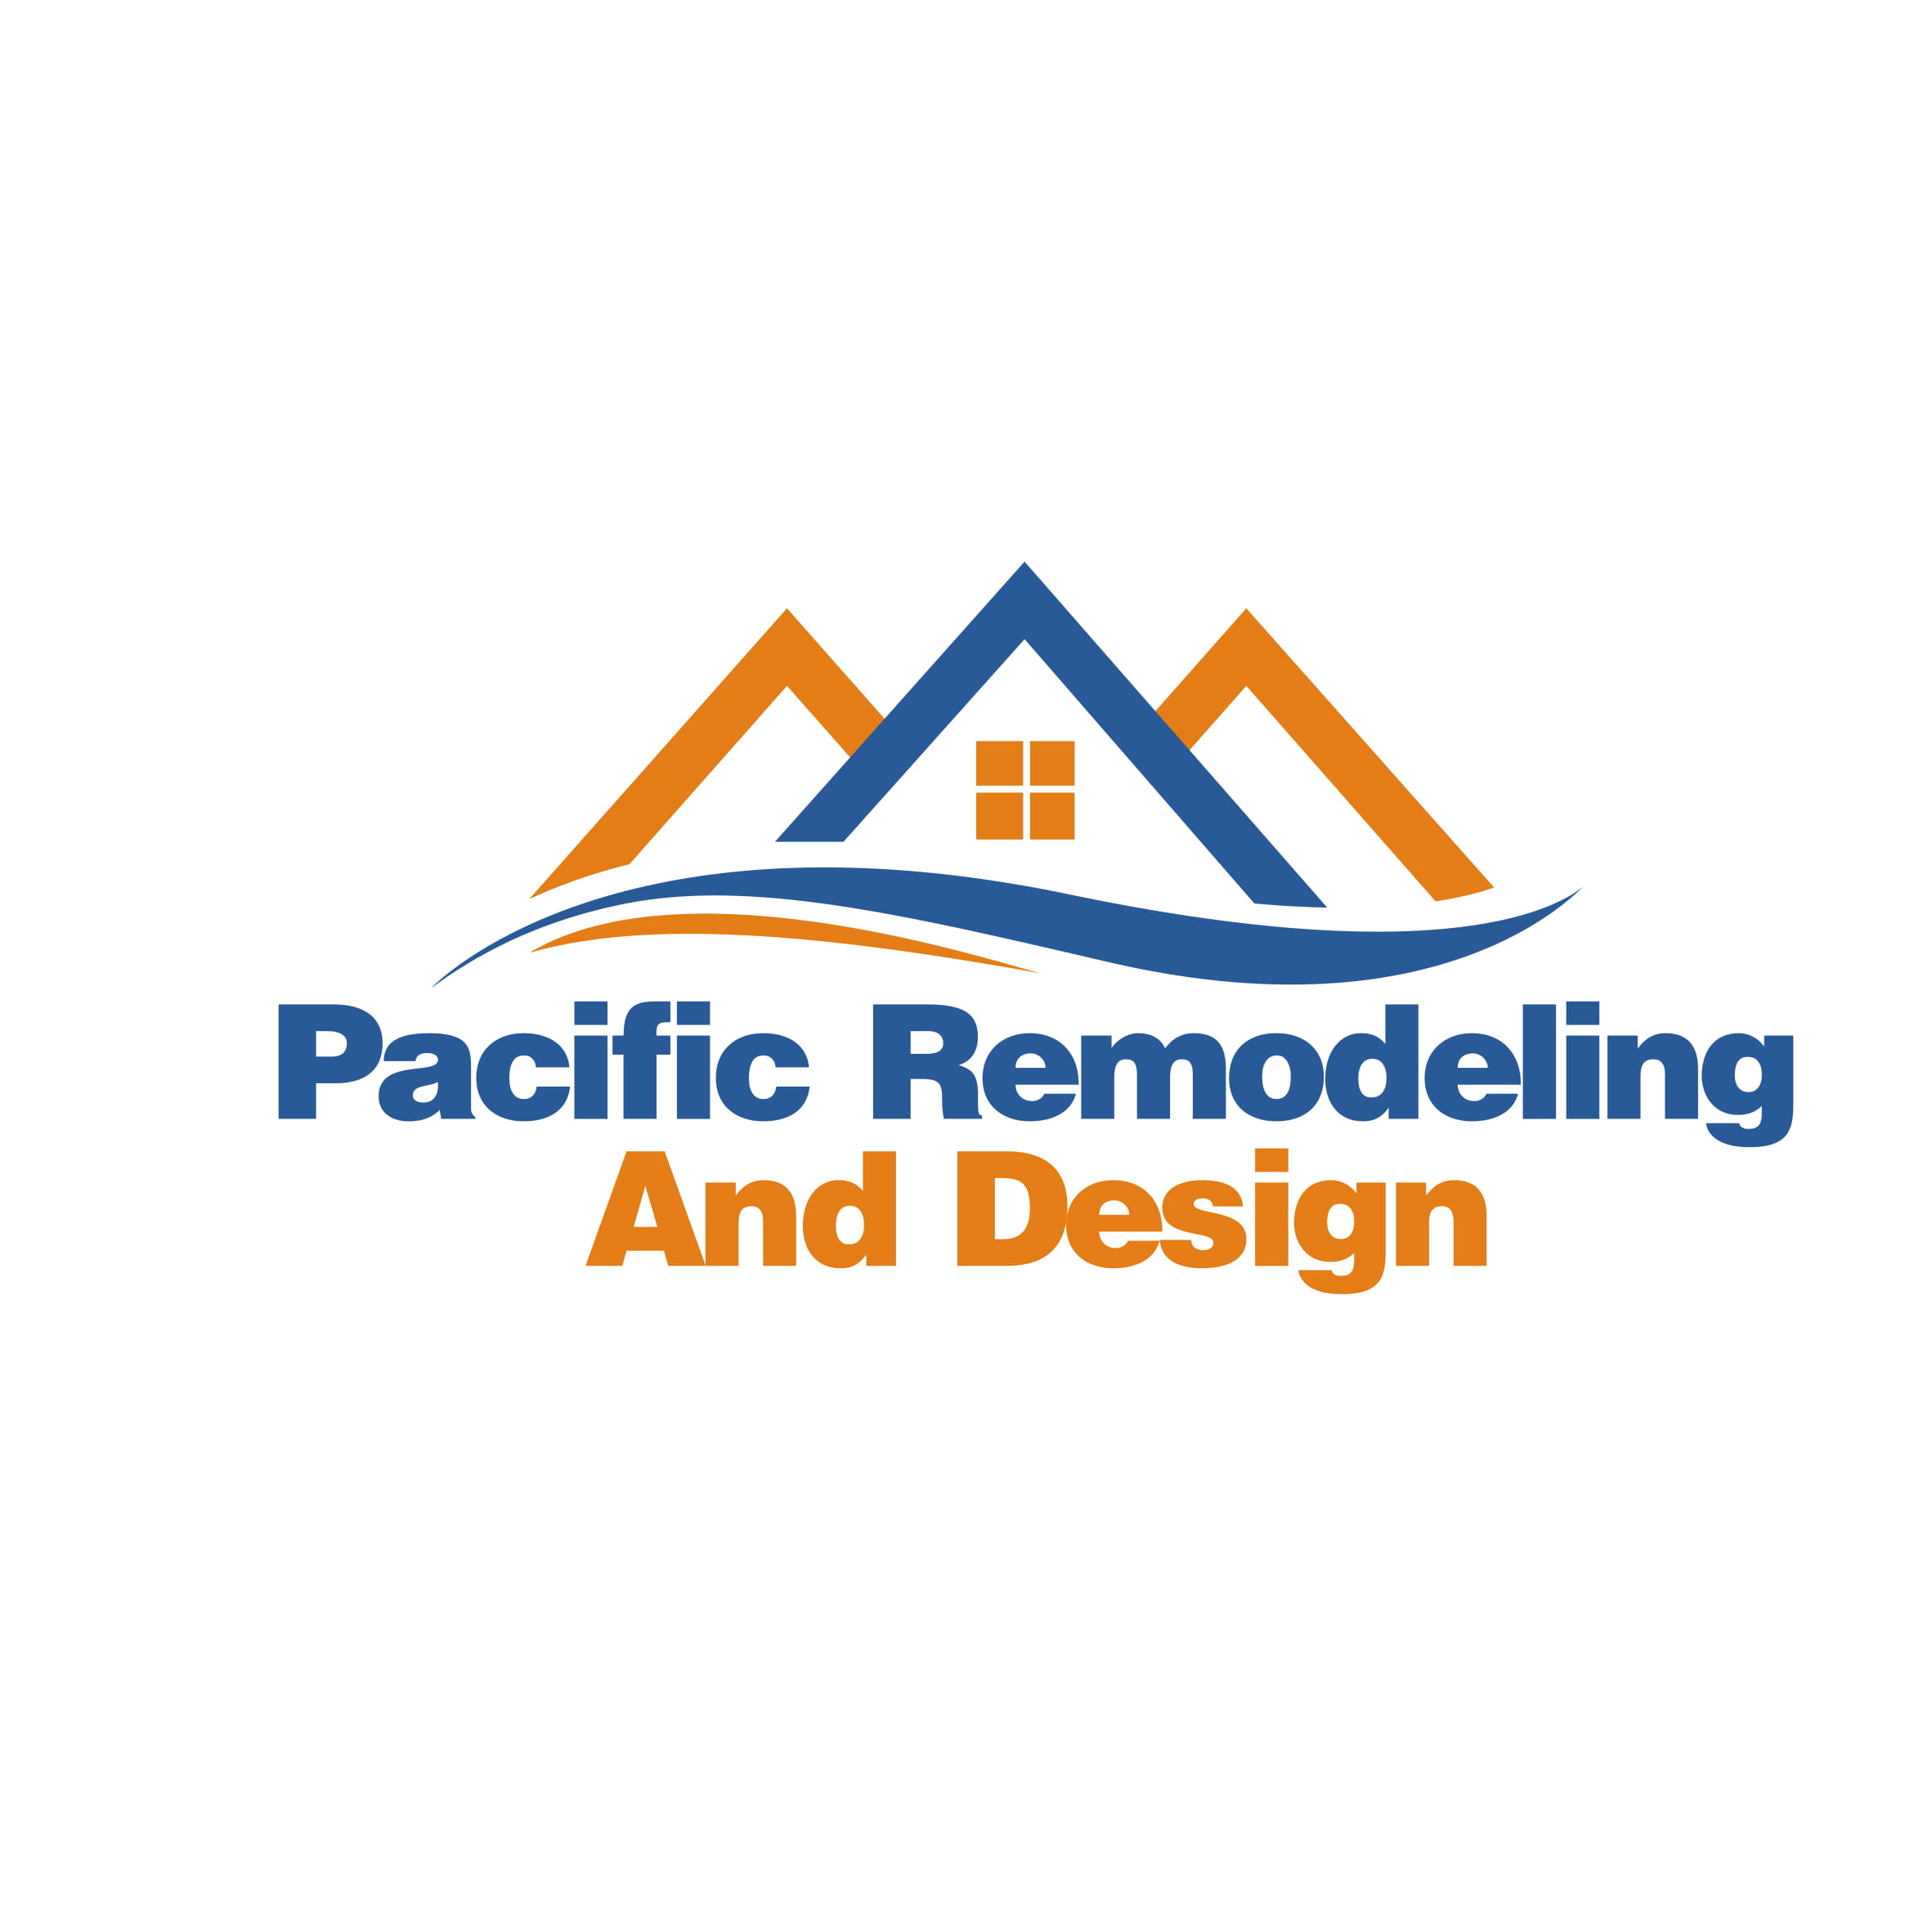 Pacific Remodeling And Design Logo